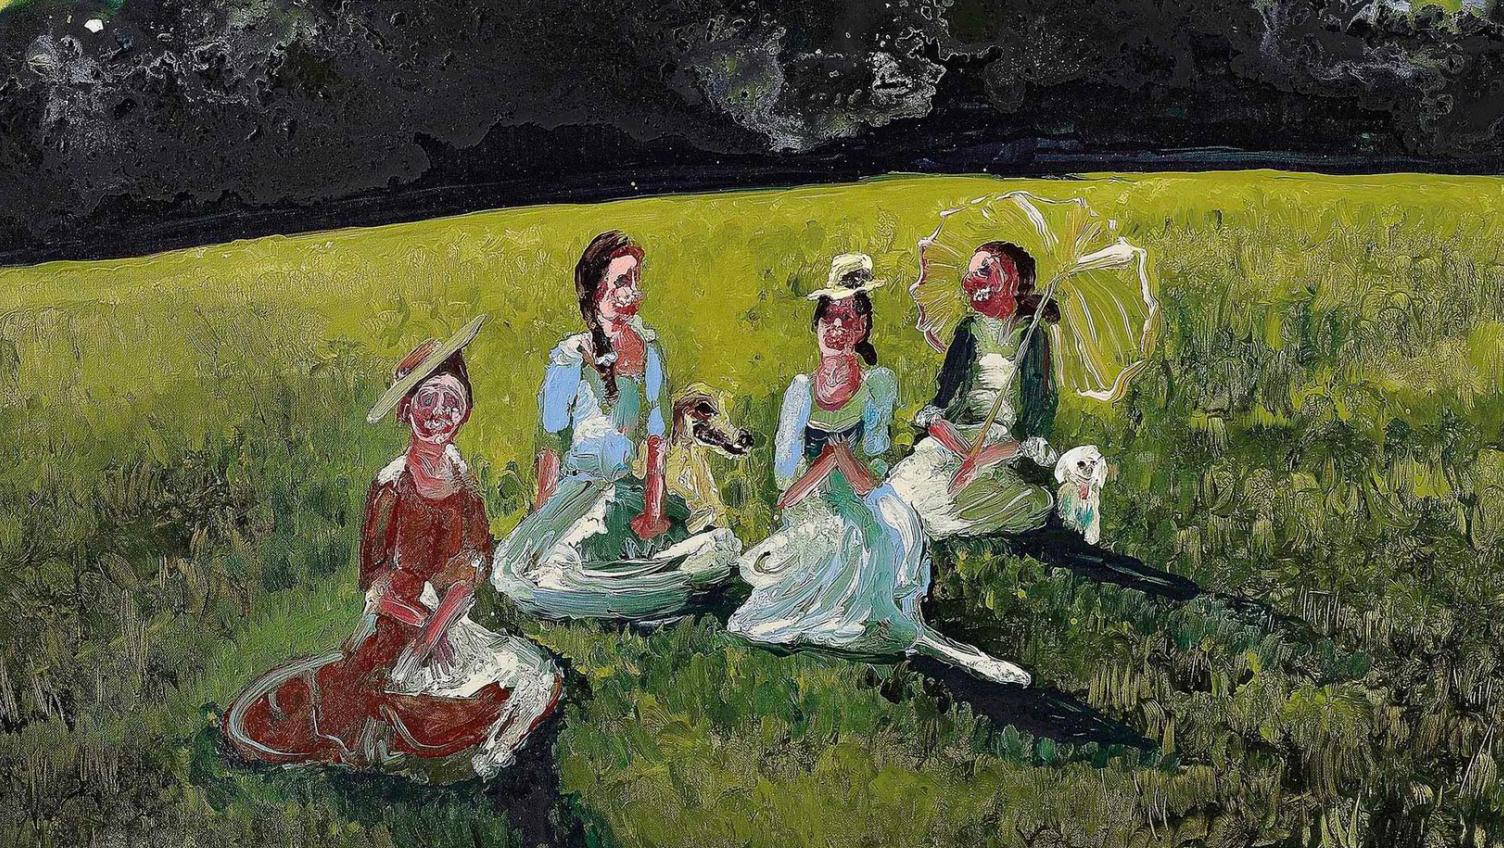 Ladies in the Grass was bought for $18,750 in summer 2019. Art Market Overview: Contemporary Art Makes a Stunning Recovery